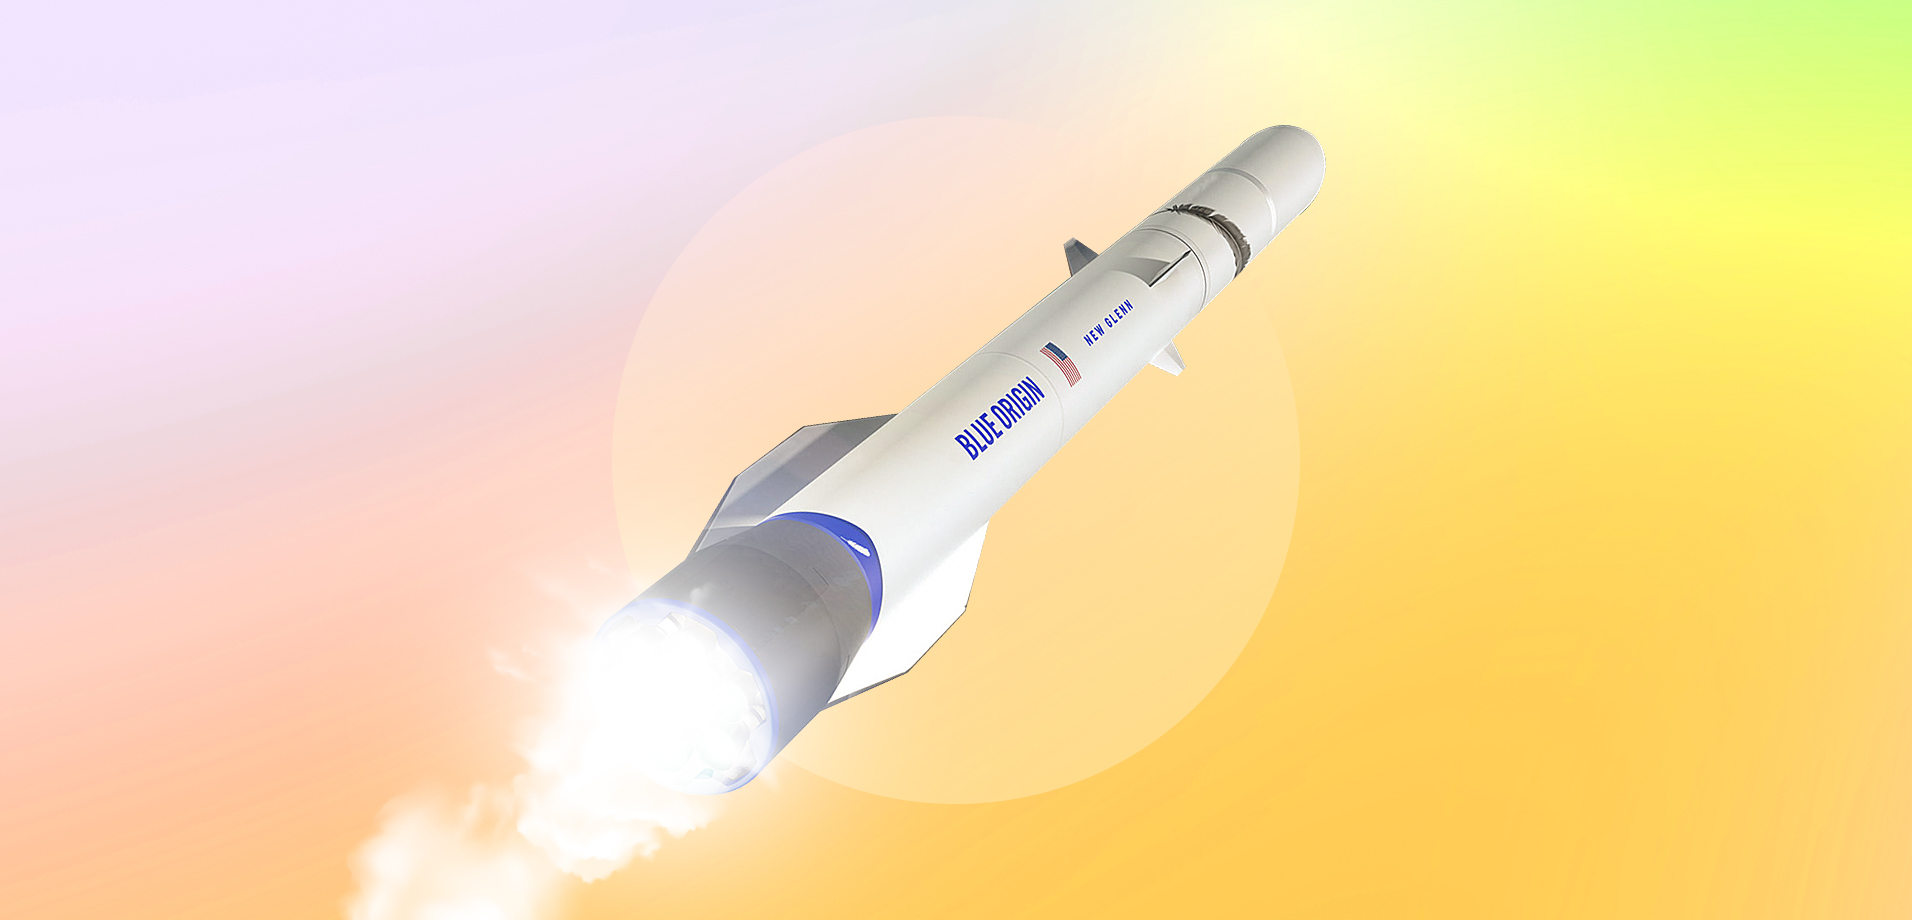 Could Blue Origin Expand Into The UK?